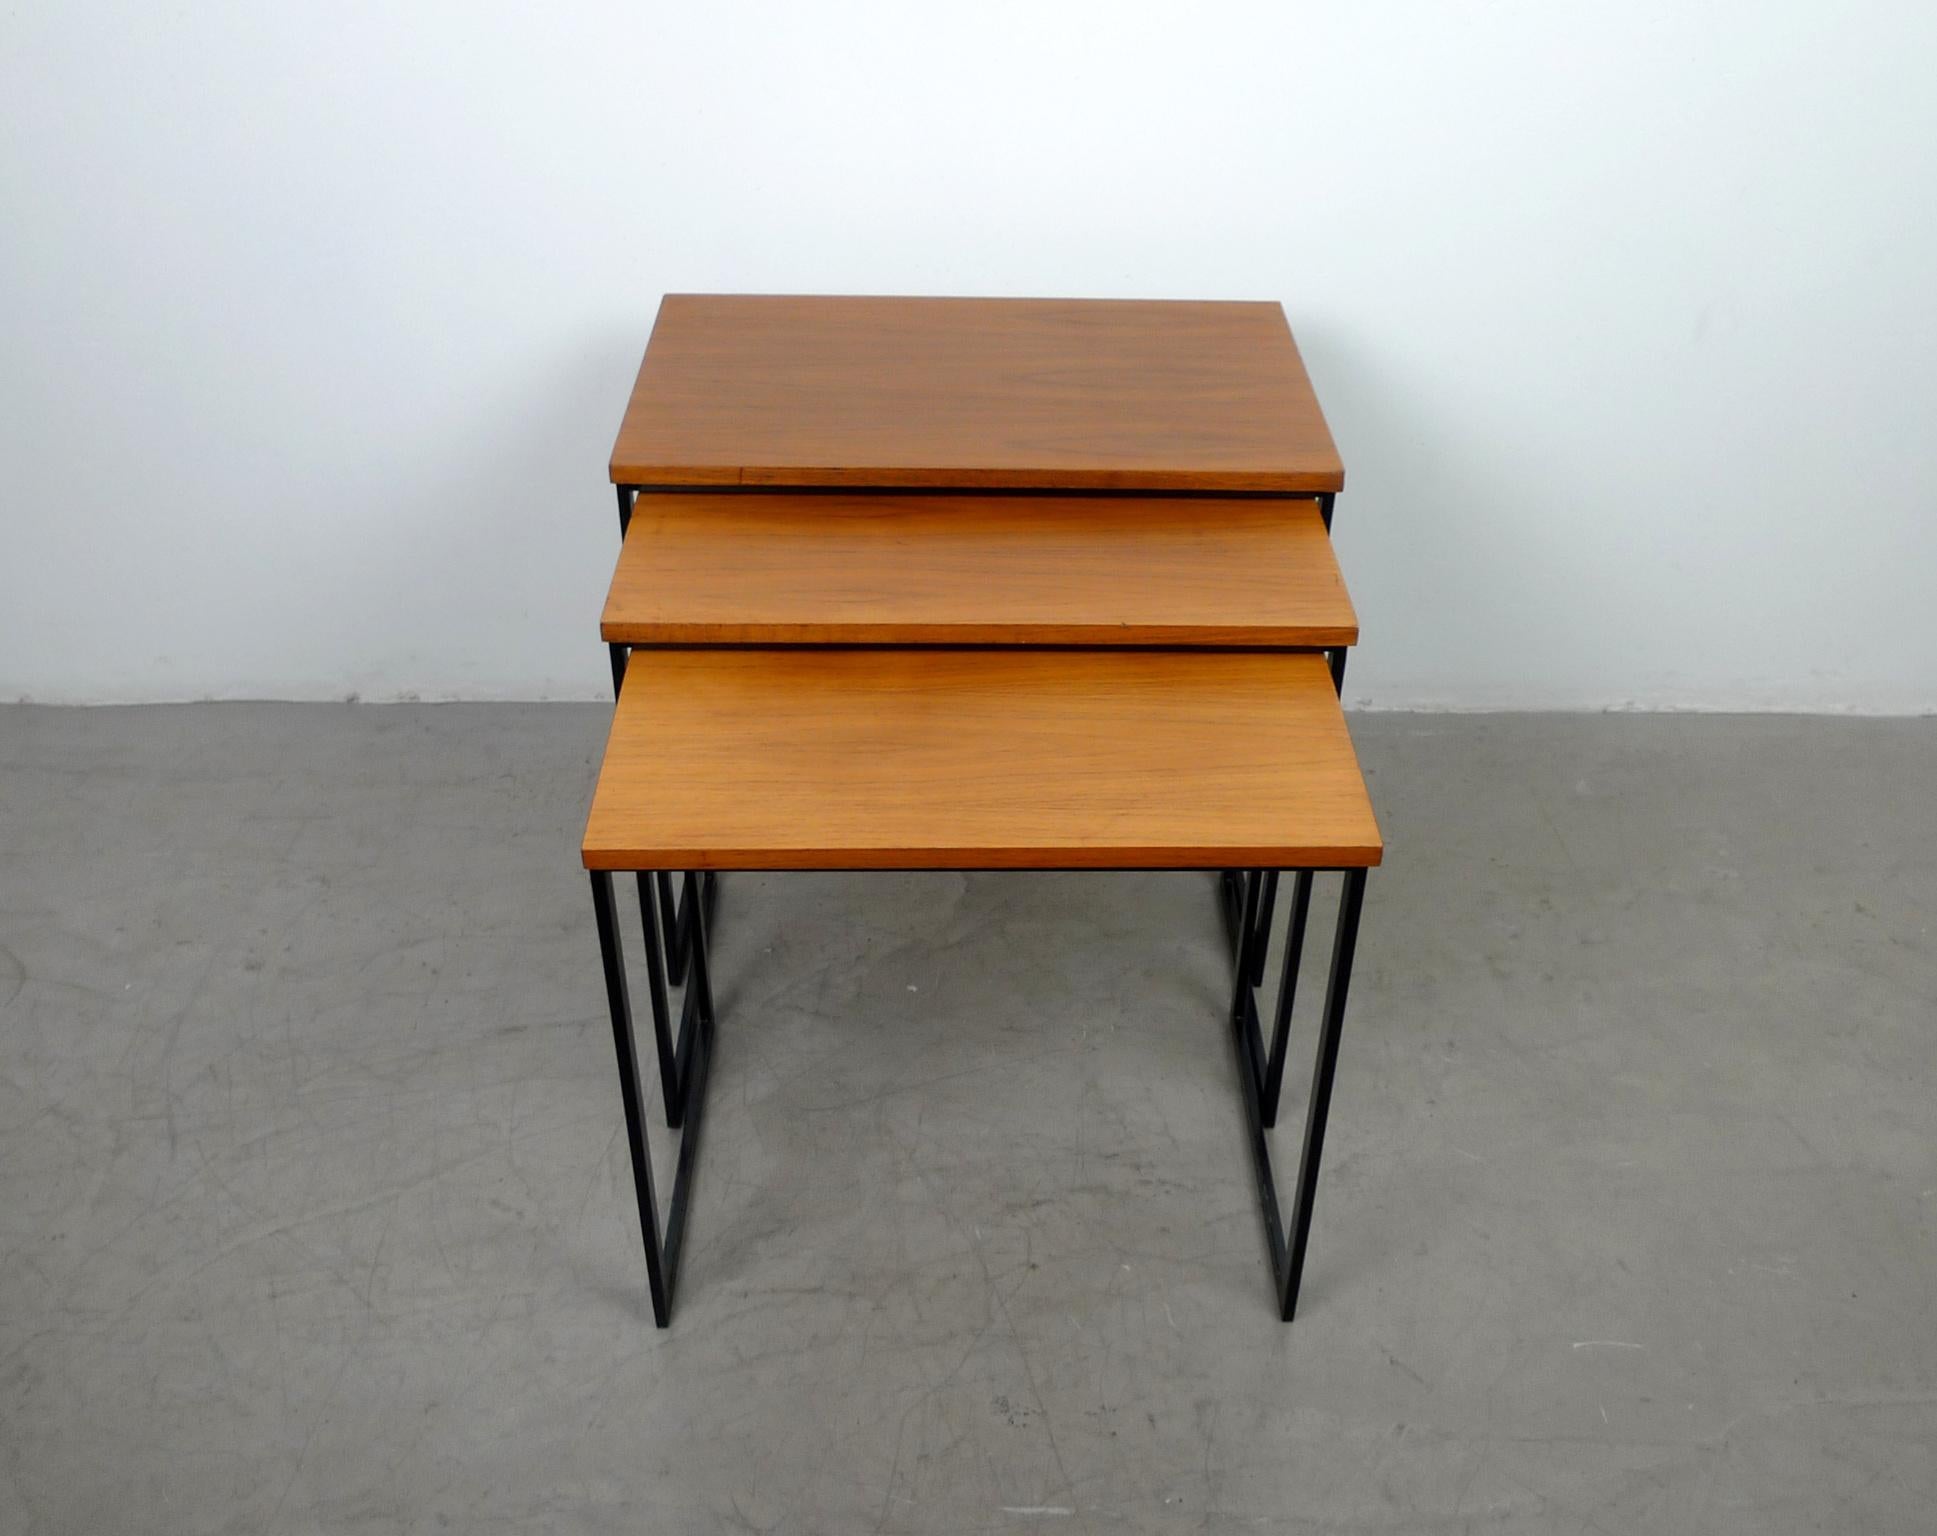 Set of three nesting tables with slender black lacquered metal frames and walnut tops from the 1960s.
The middle table measures 55 x 36 x 52 cm (W x D x H).
The small table measures 51 x 36 x 49 cm (W x D x H)
The dimensions of the large table